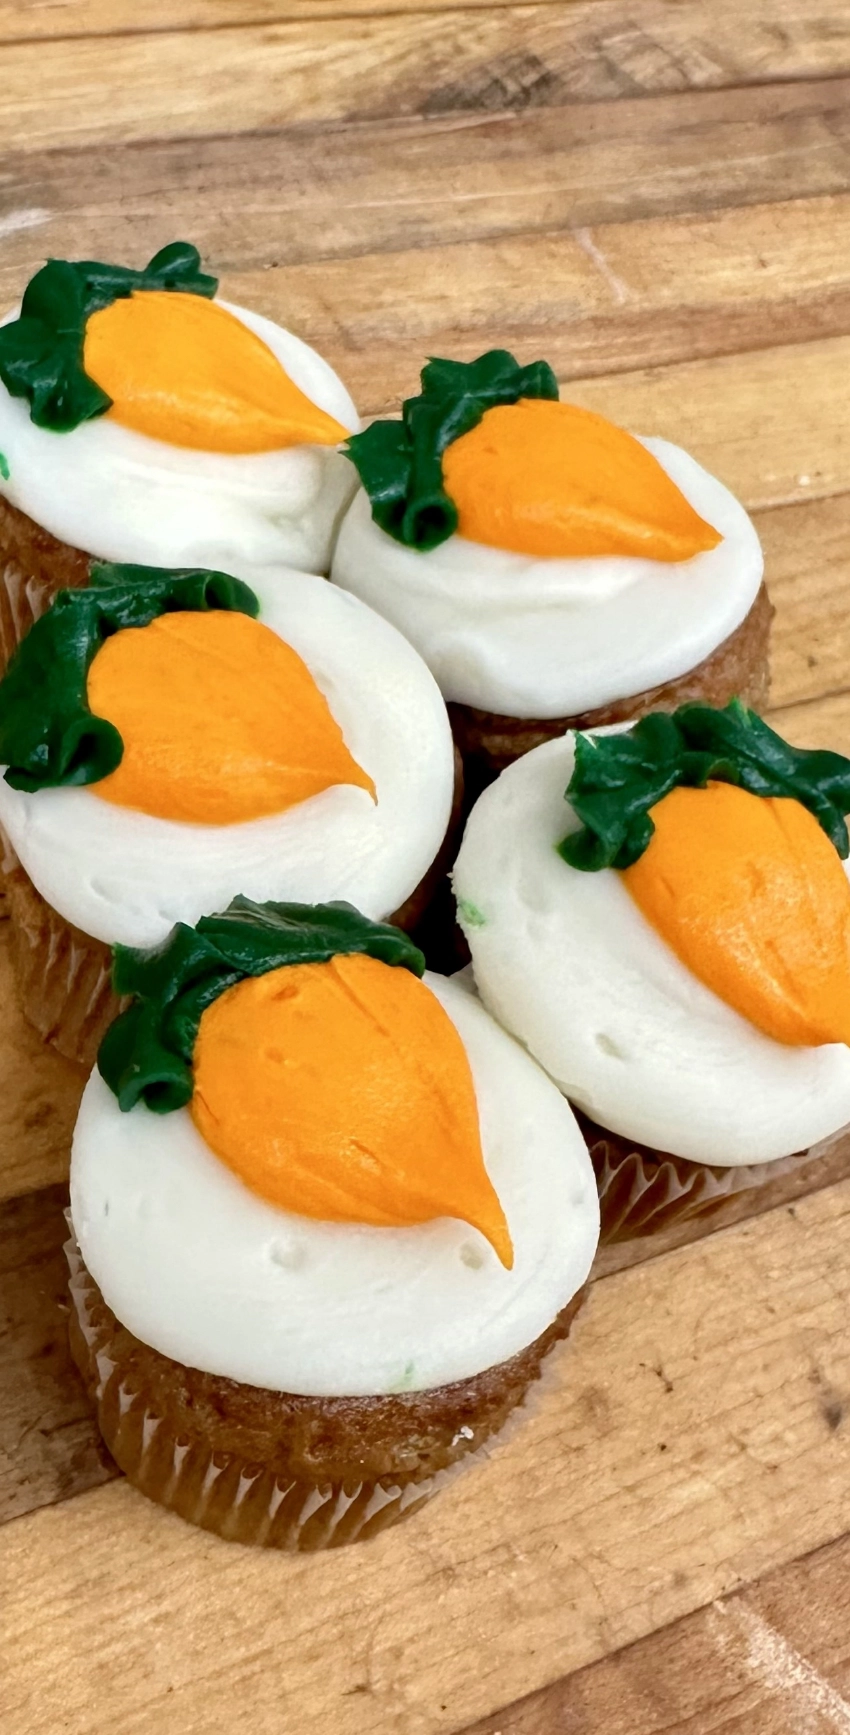 Five cupcakes with white frosting and orange carrot decorations on top, arranged on a wooden surface.